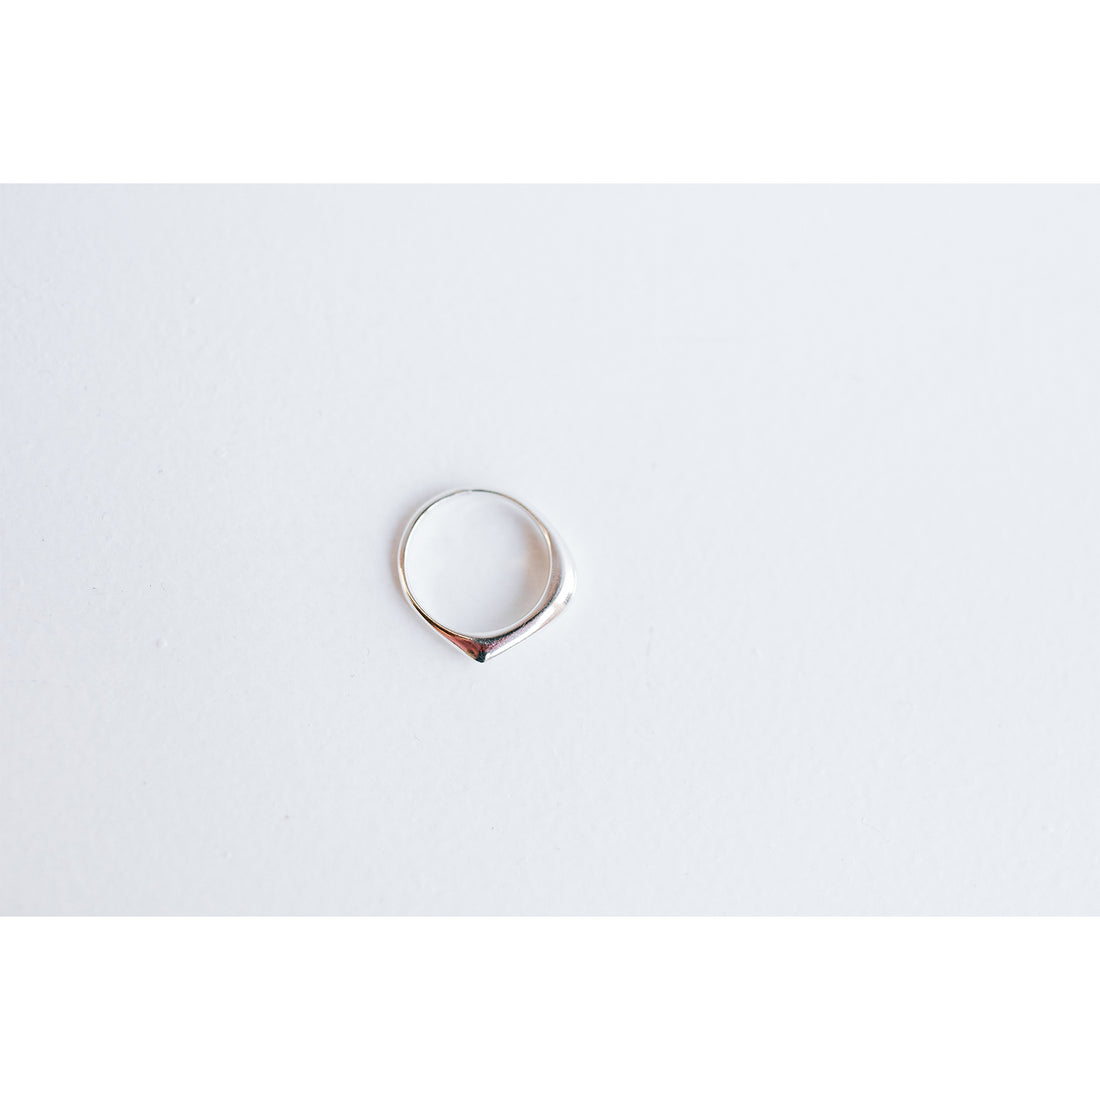 Fay Andrada Nena Small Ring in Sterling Silver